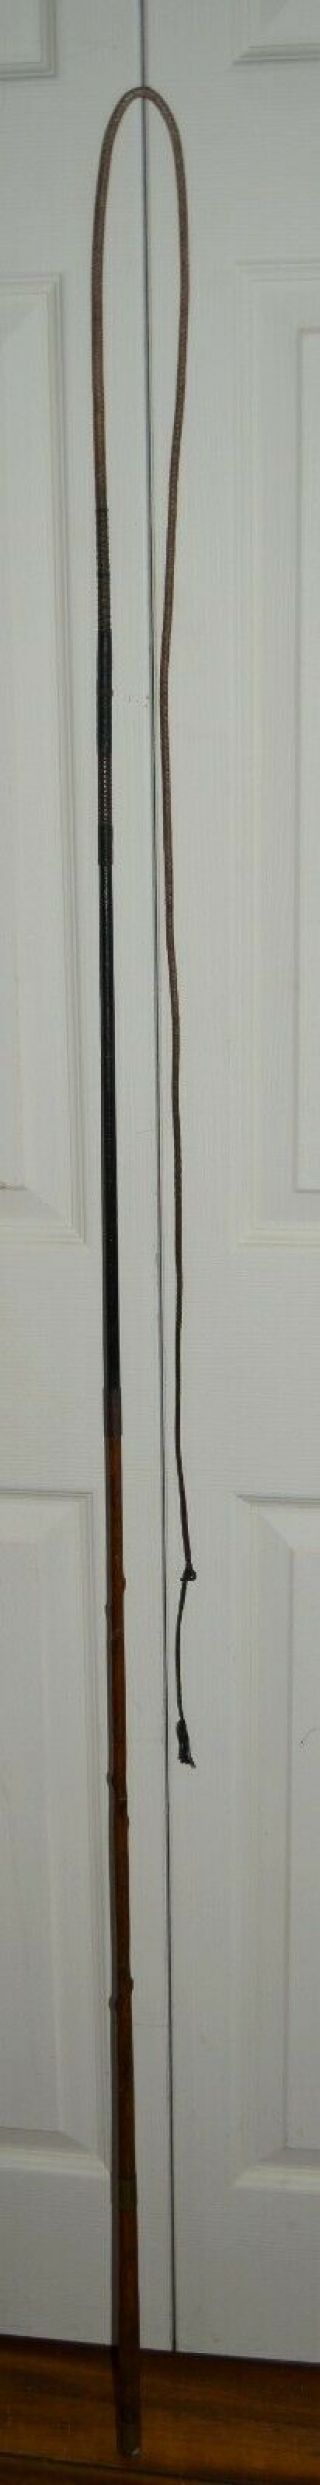 Antique Victorian Holly Coach/ Carriage Driving Whip